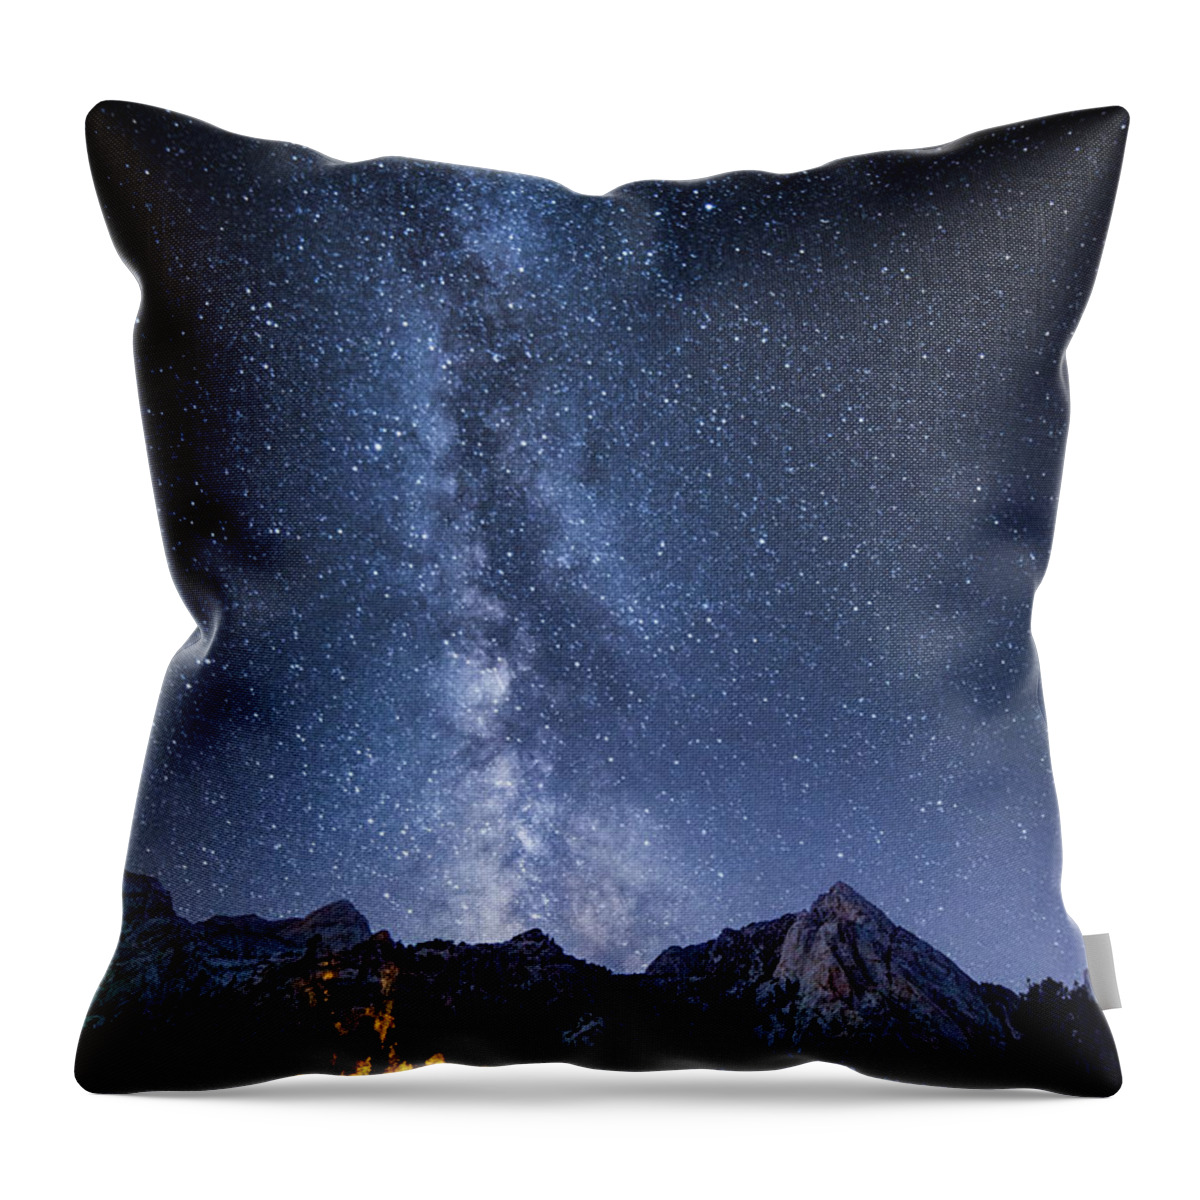 Scenics Throw Pillow featuring the photograph Stars Of Alabama Hills by Mos-photography